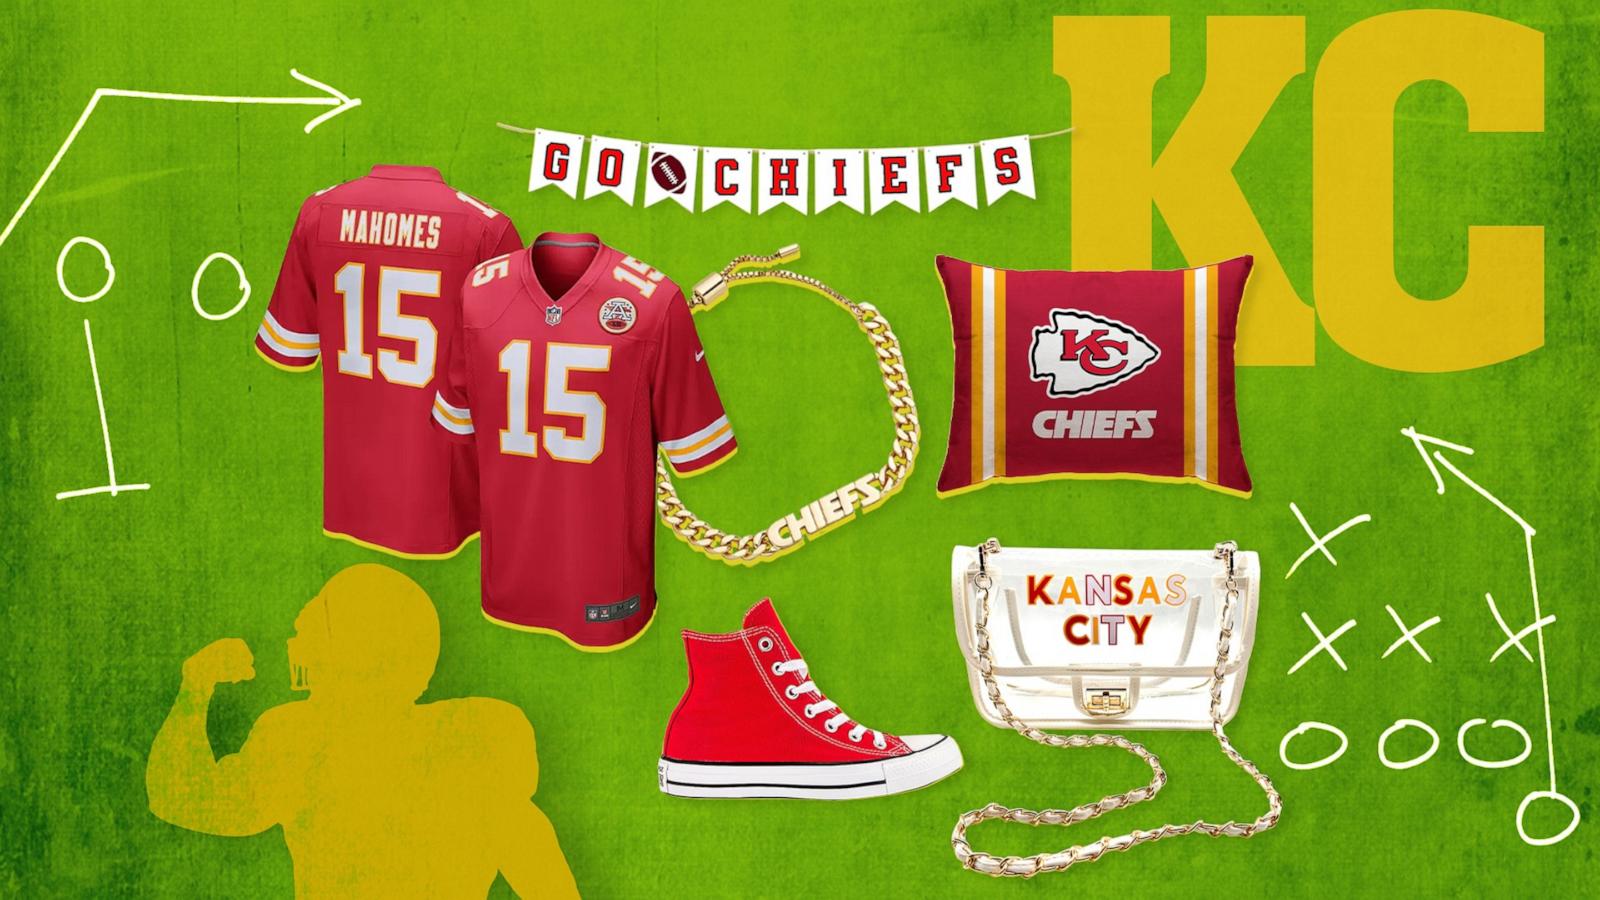 All the San Francisco 49ers merch you need for the Super Bowl